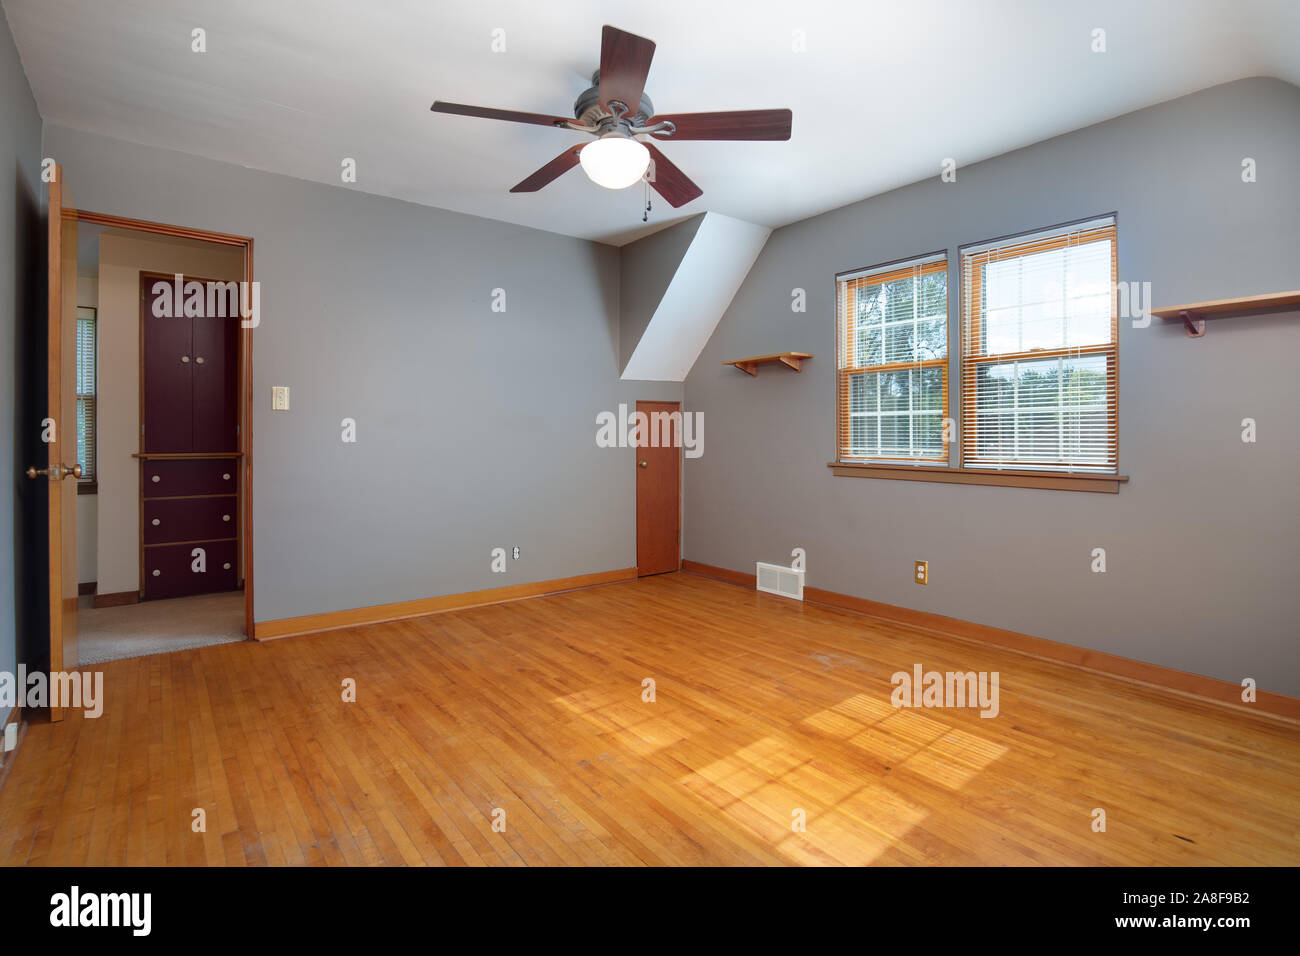 An old, plain grey room with no furniture and hardwood floors looking towards the hallway. Stock Photo